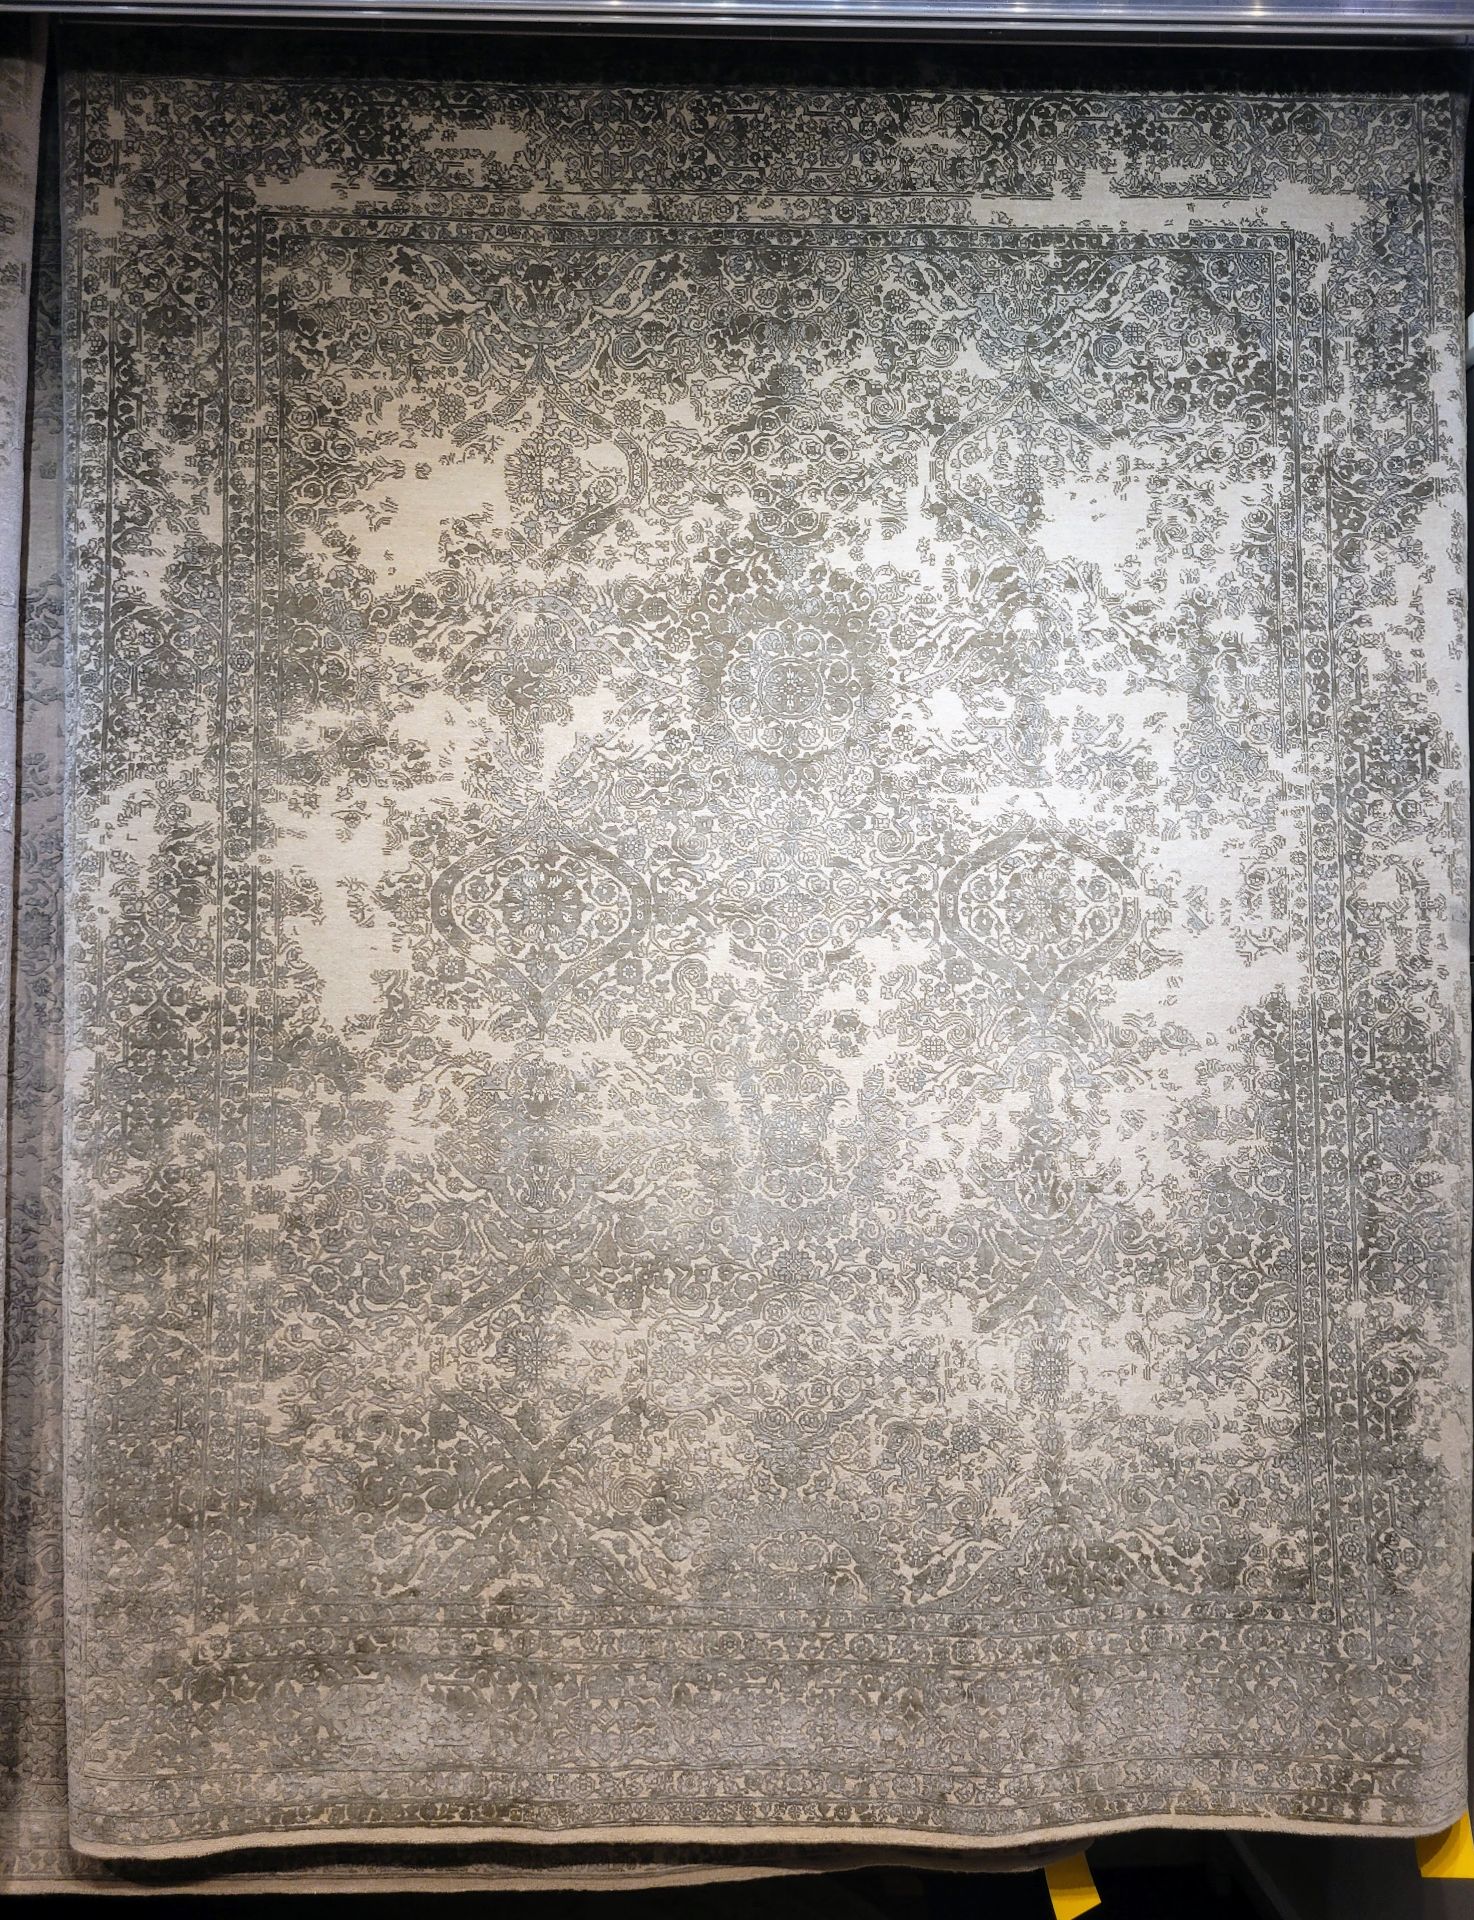 APPROX 8' x 10' - BEIGE/SILVER - WOOL/ART. SILK HAND KNOTTED IN INDIA - MSRP $10,658.00 (LOCATED